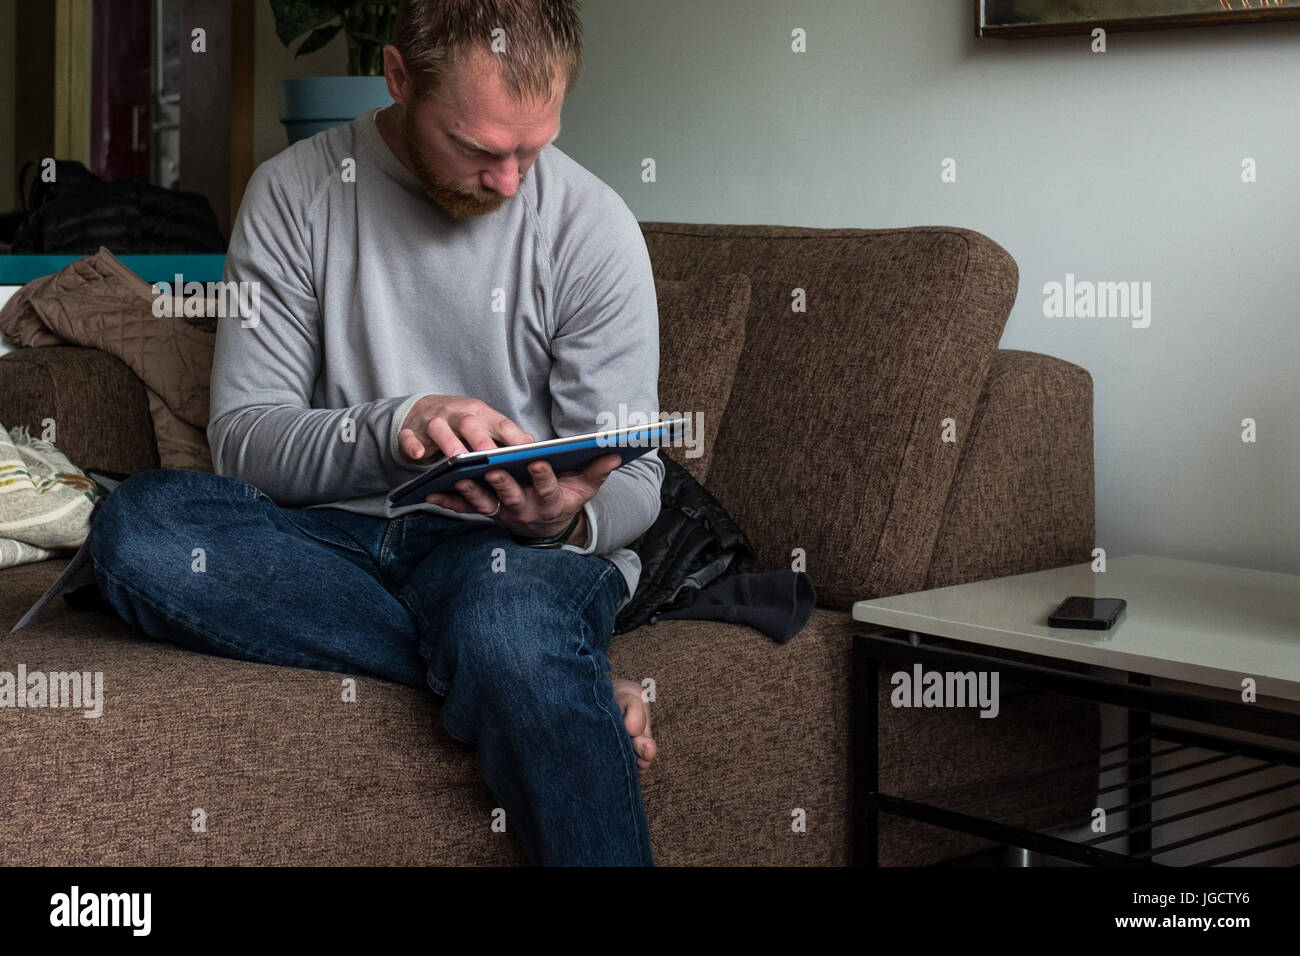 Man sitting on couch using a digital tablet Stock Photo